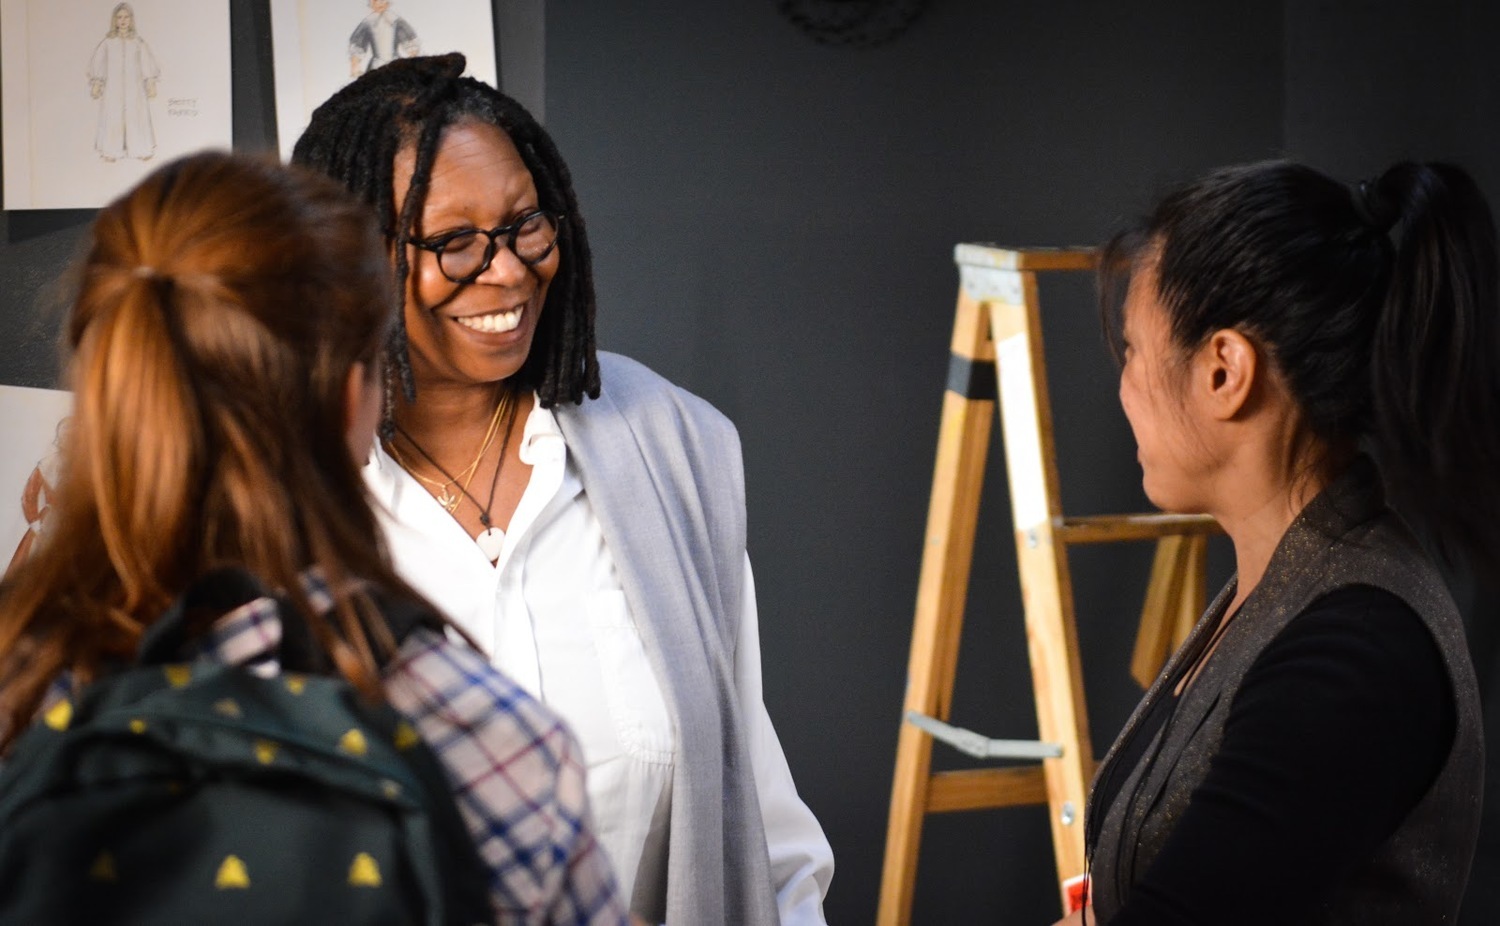 Whoopi Goldberg Stars in Jen Rudin's Short Film LUCY IN THE SKY at Indy Shorts 